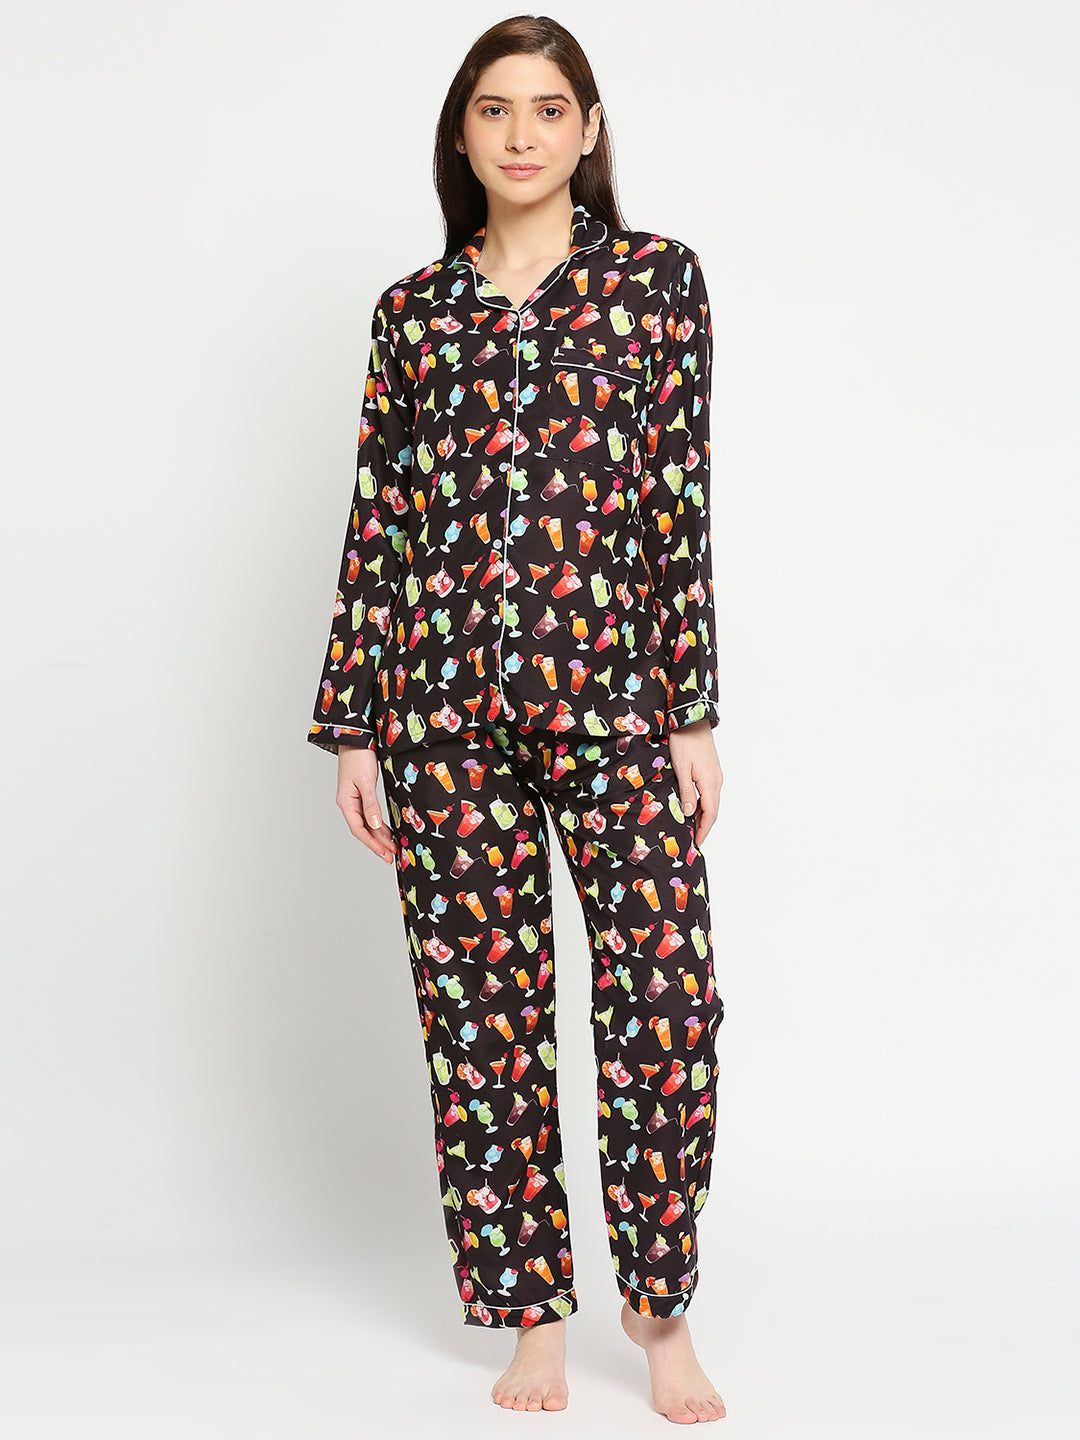 Cocktail Party Button Down Pj Set - Cotton Rayon Pj Set with Notched Collar